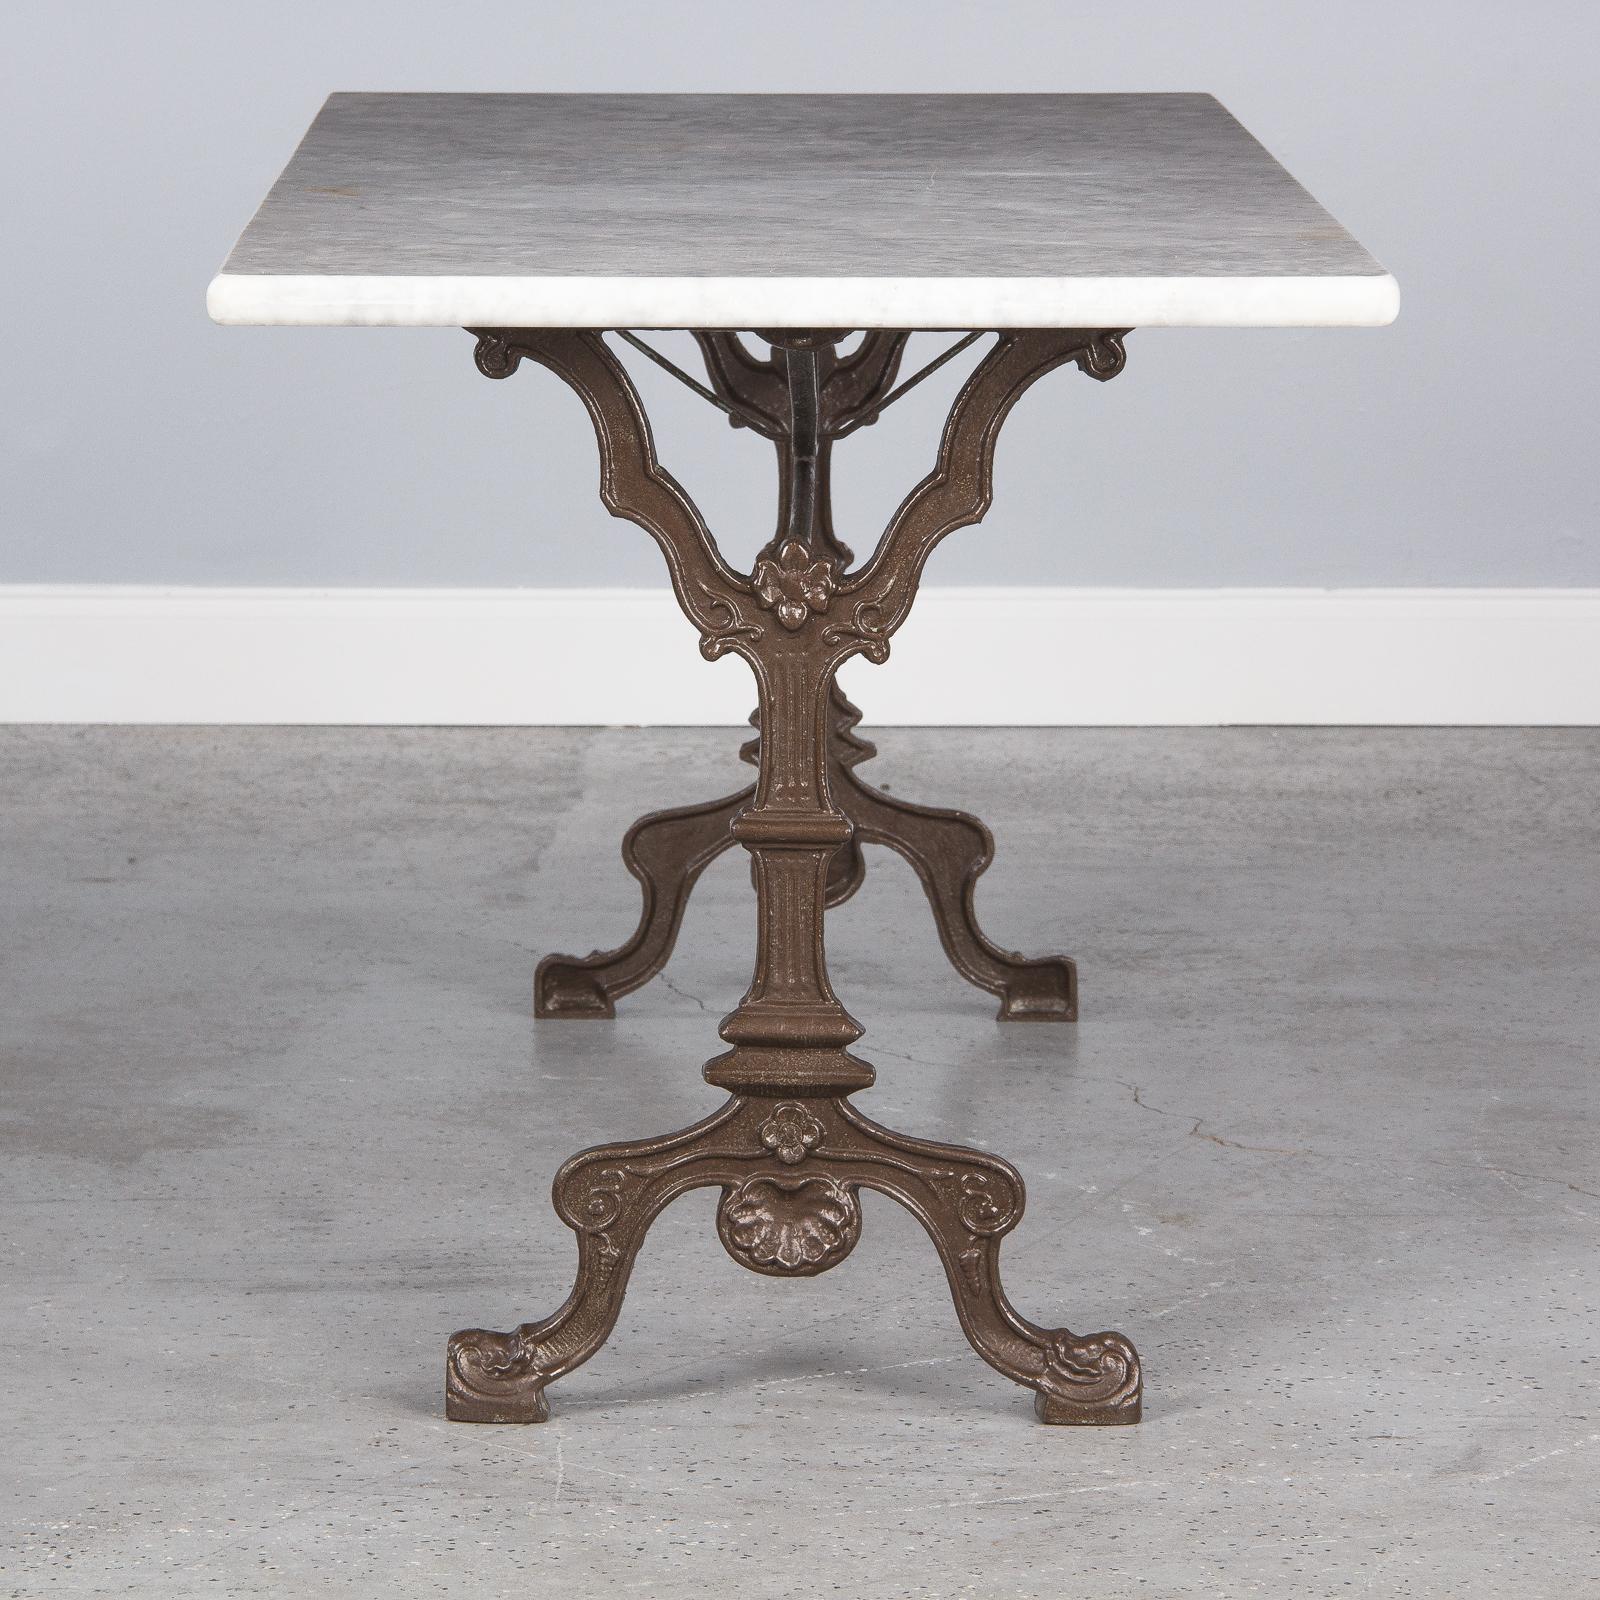 20th Century French Bistro Table with Iron Base and Marble Top, Early 1900s